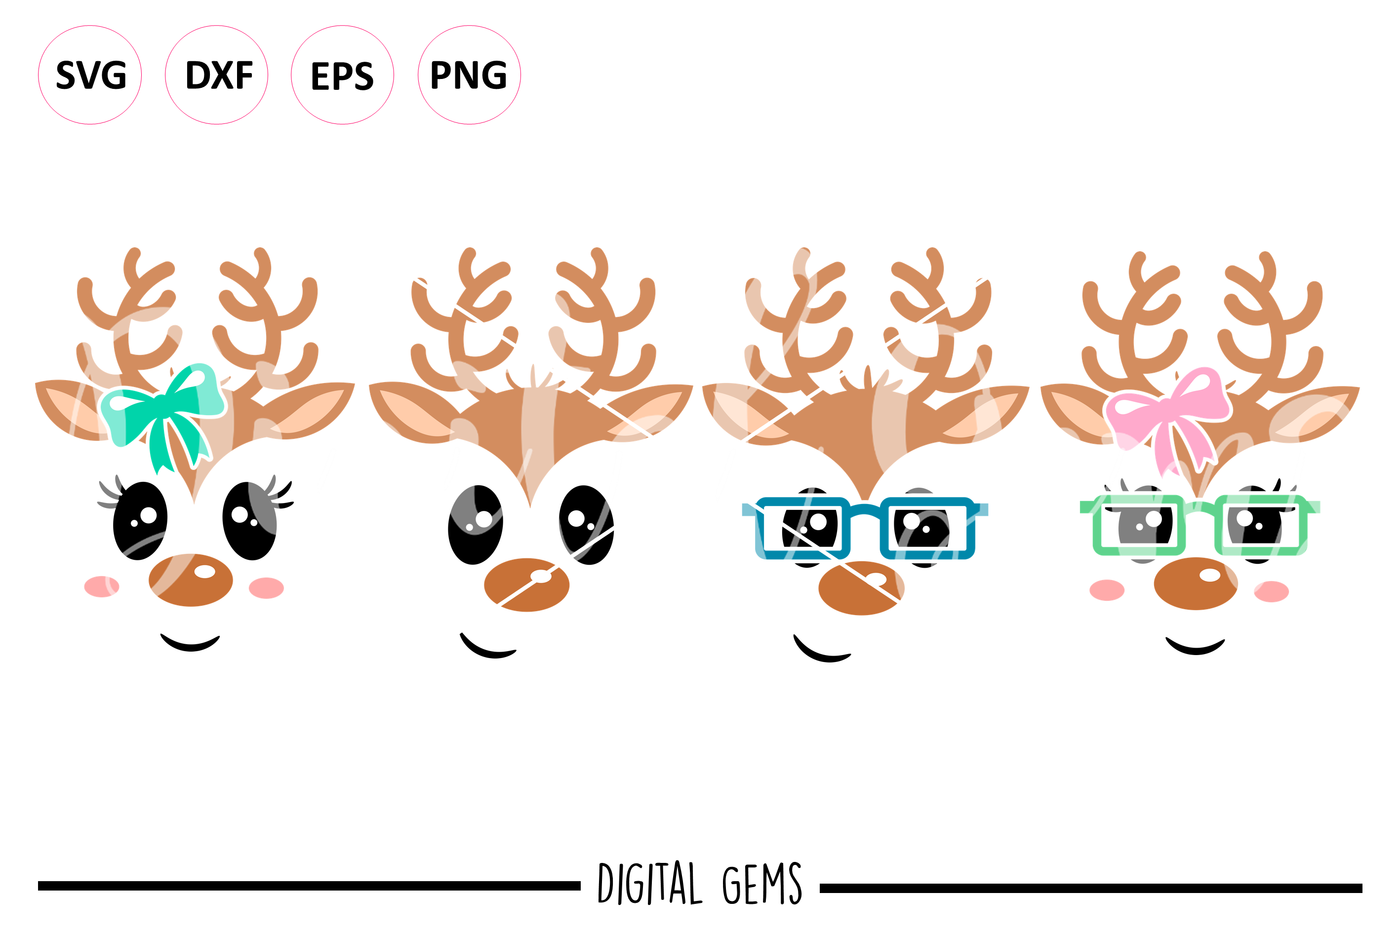 ori 107751 6b0b8d562ab960c70205a2b9e4453db560be0d96 reindeer face svg dxf eps png files